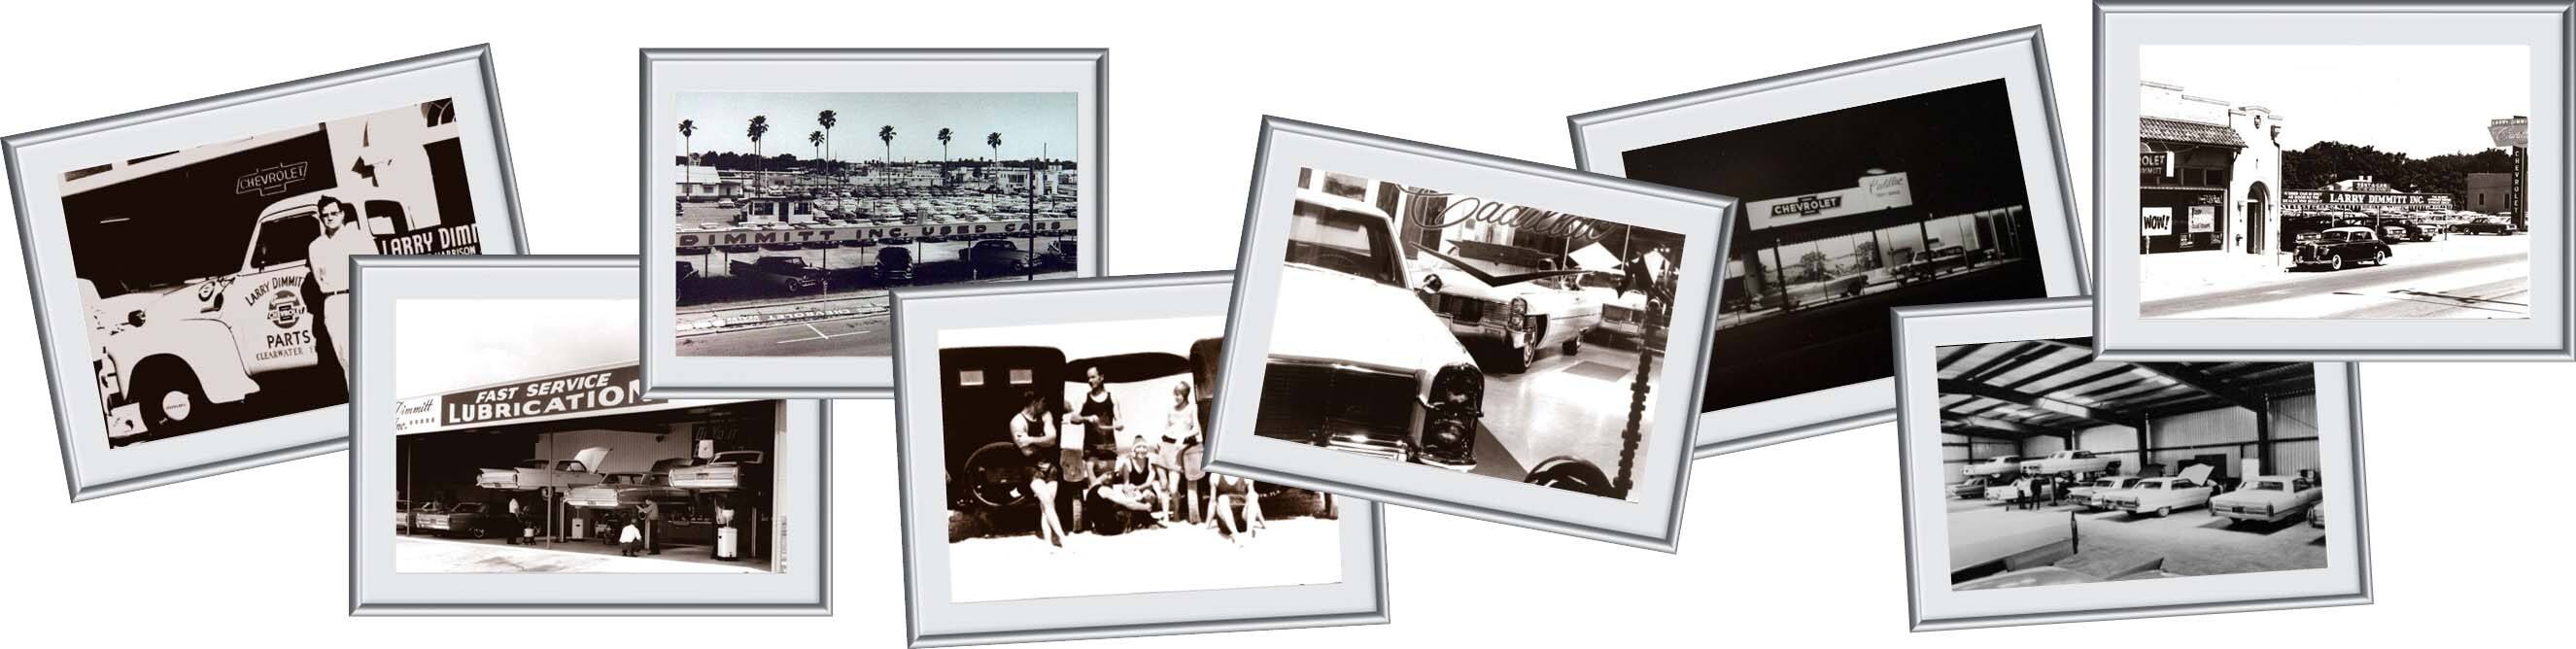 Timeline of photos showing the history and progress of Dimmitt Automotive Group